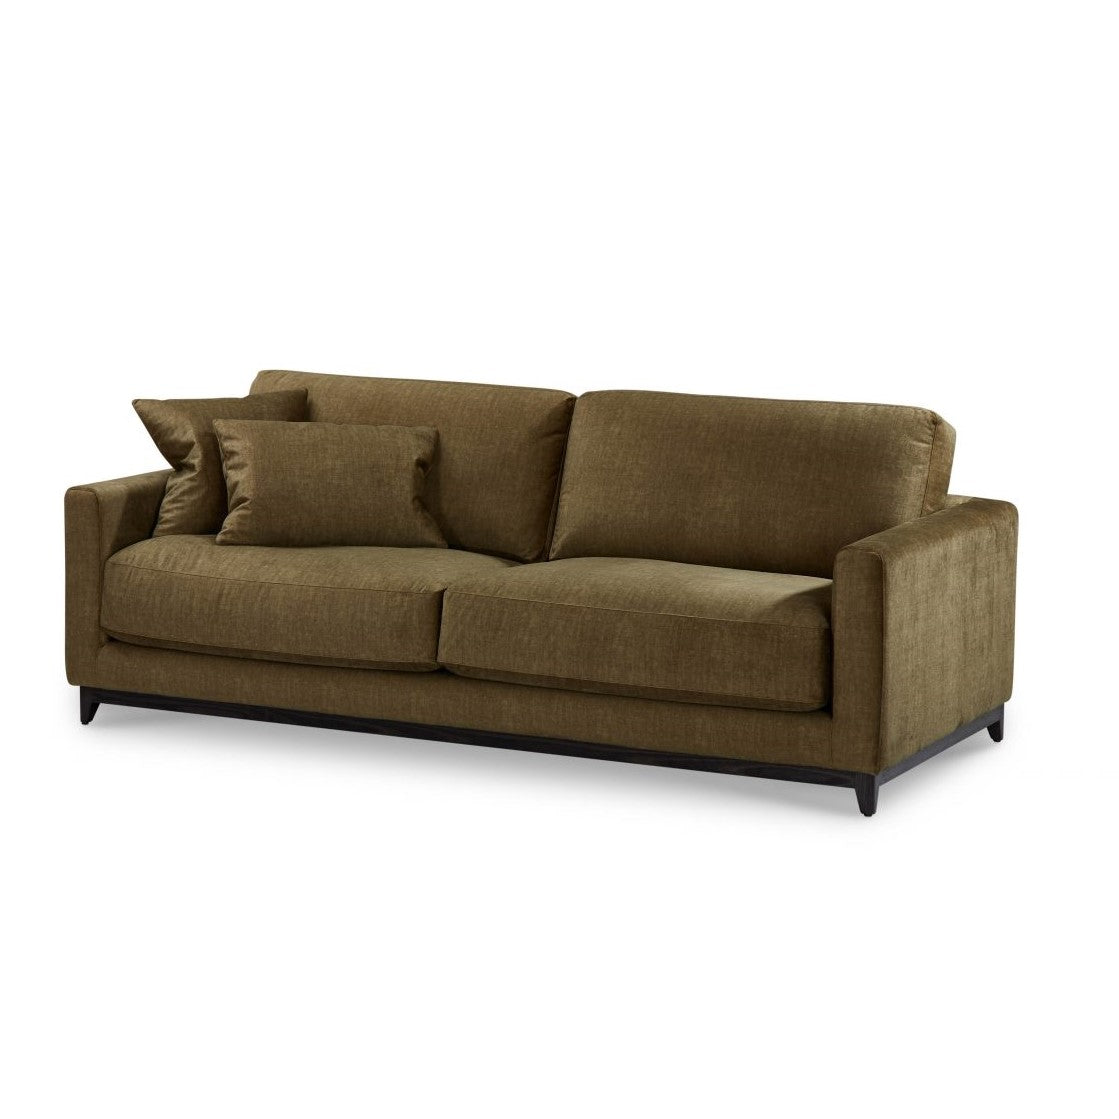 Dane Sofa by Molmic available from Make Your House A Home, Furniture Store located in Bendigo, Victoria. Australian Made in Melbourne.